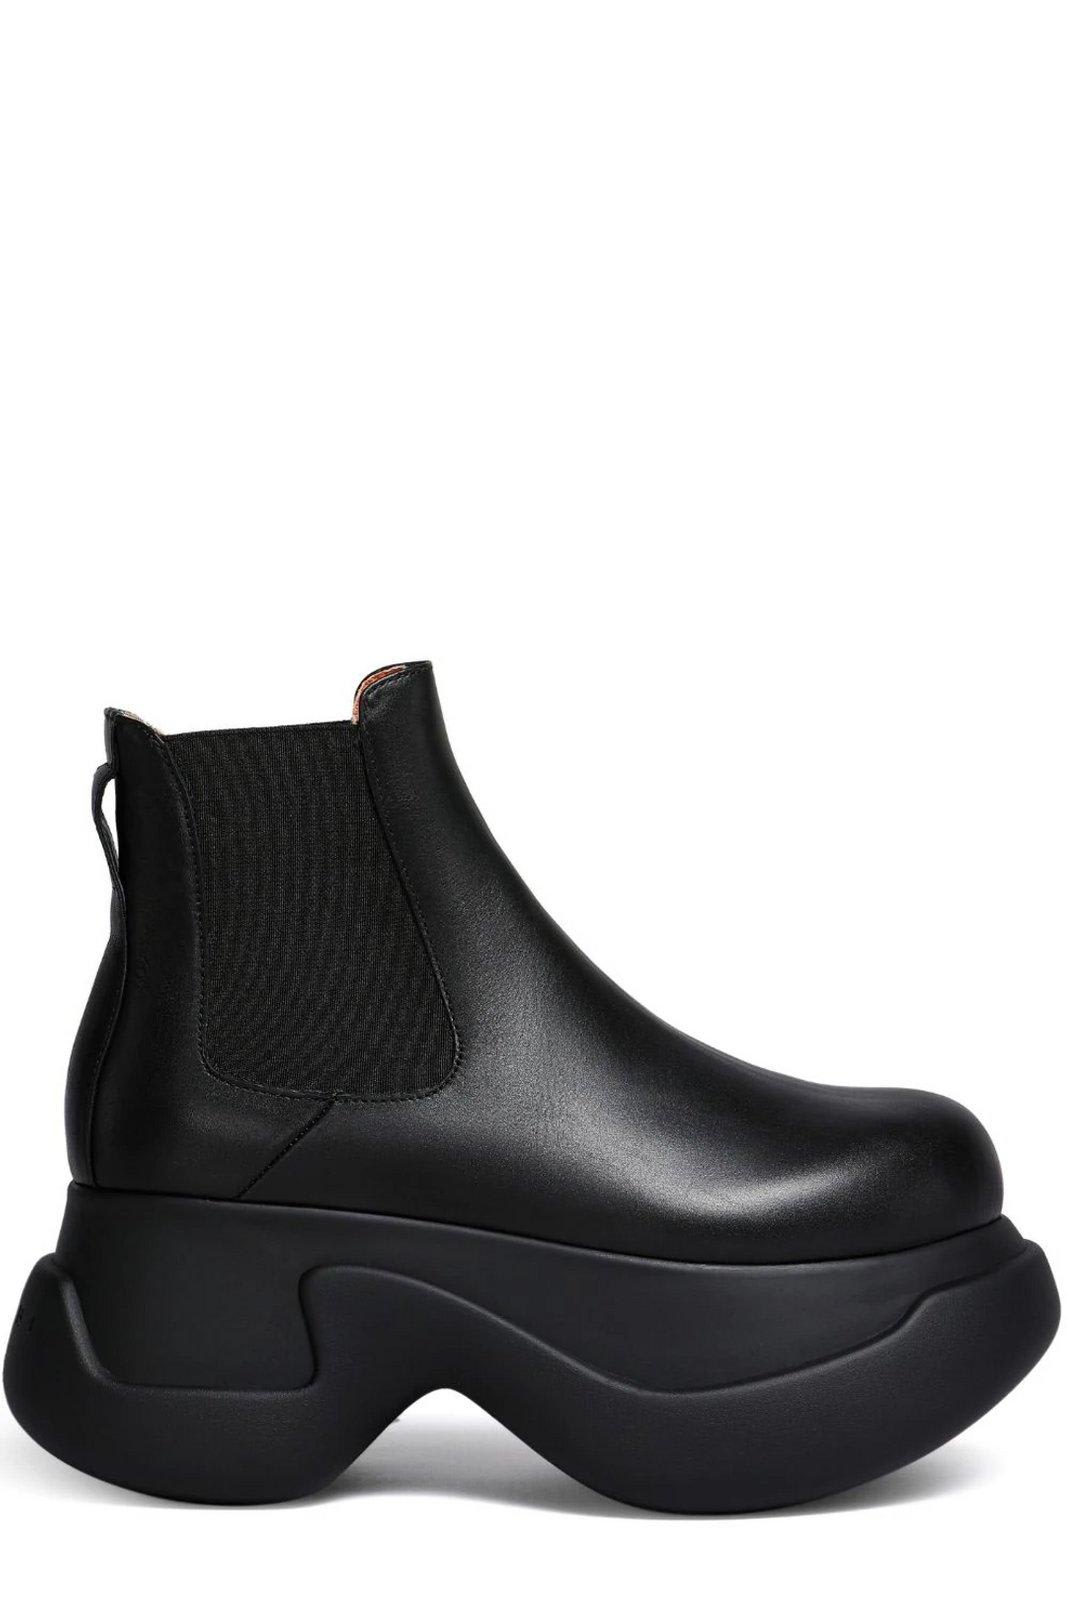 Marni Round-toe Slip-on Ankle Boots In Nero